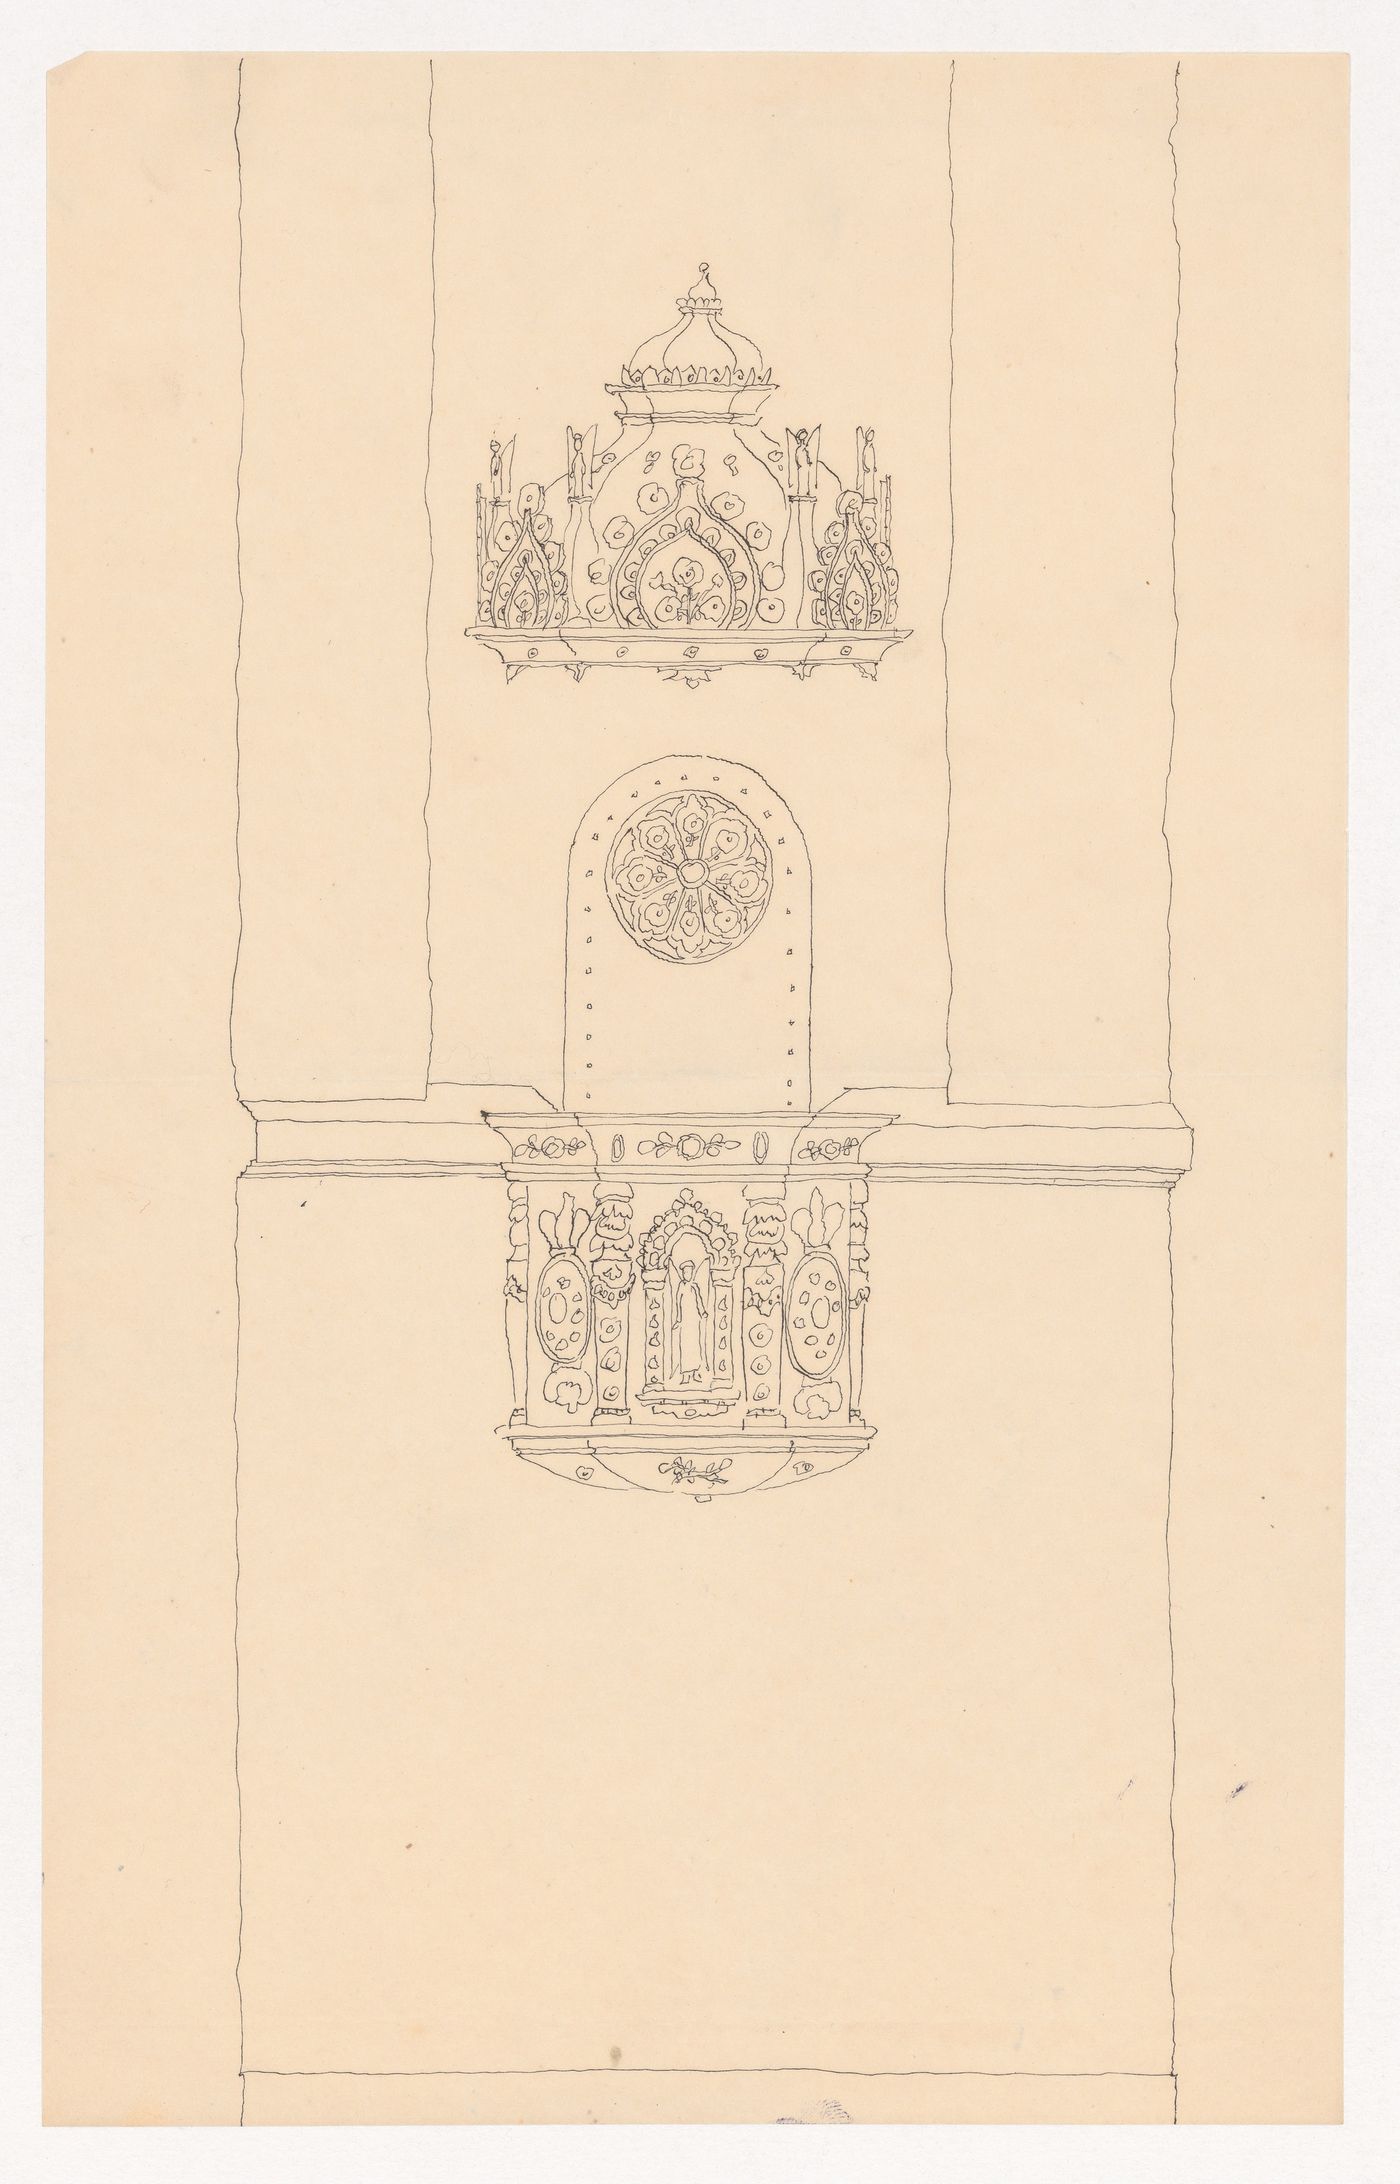 Design for architectural ornament on a wall